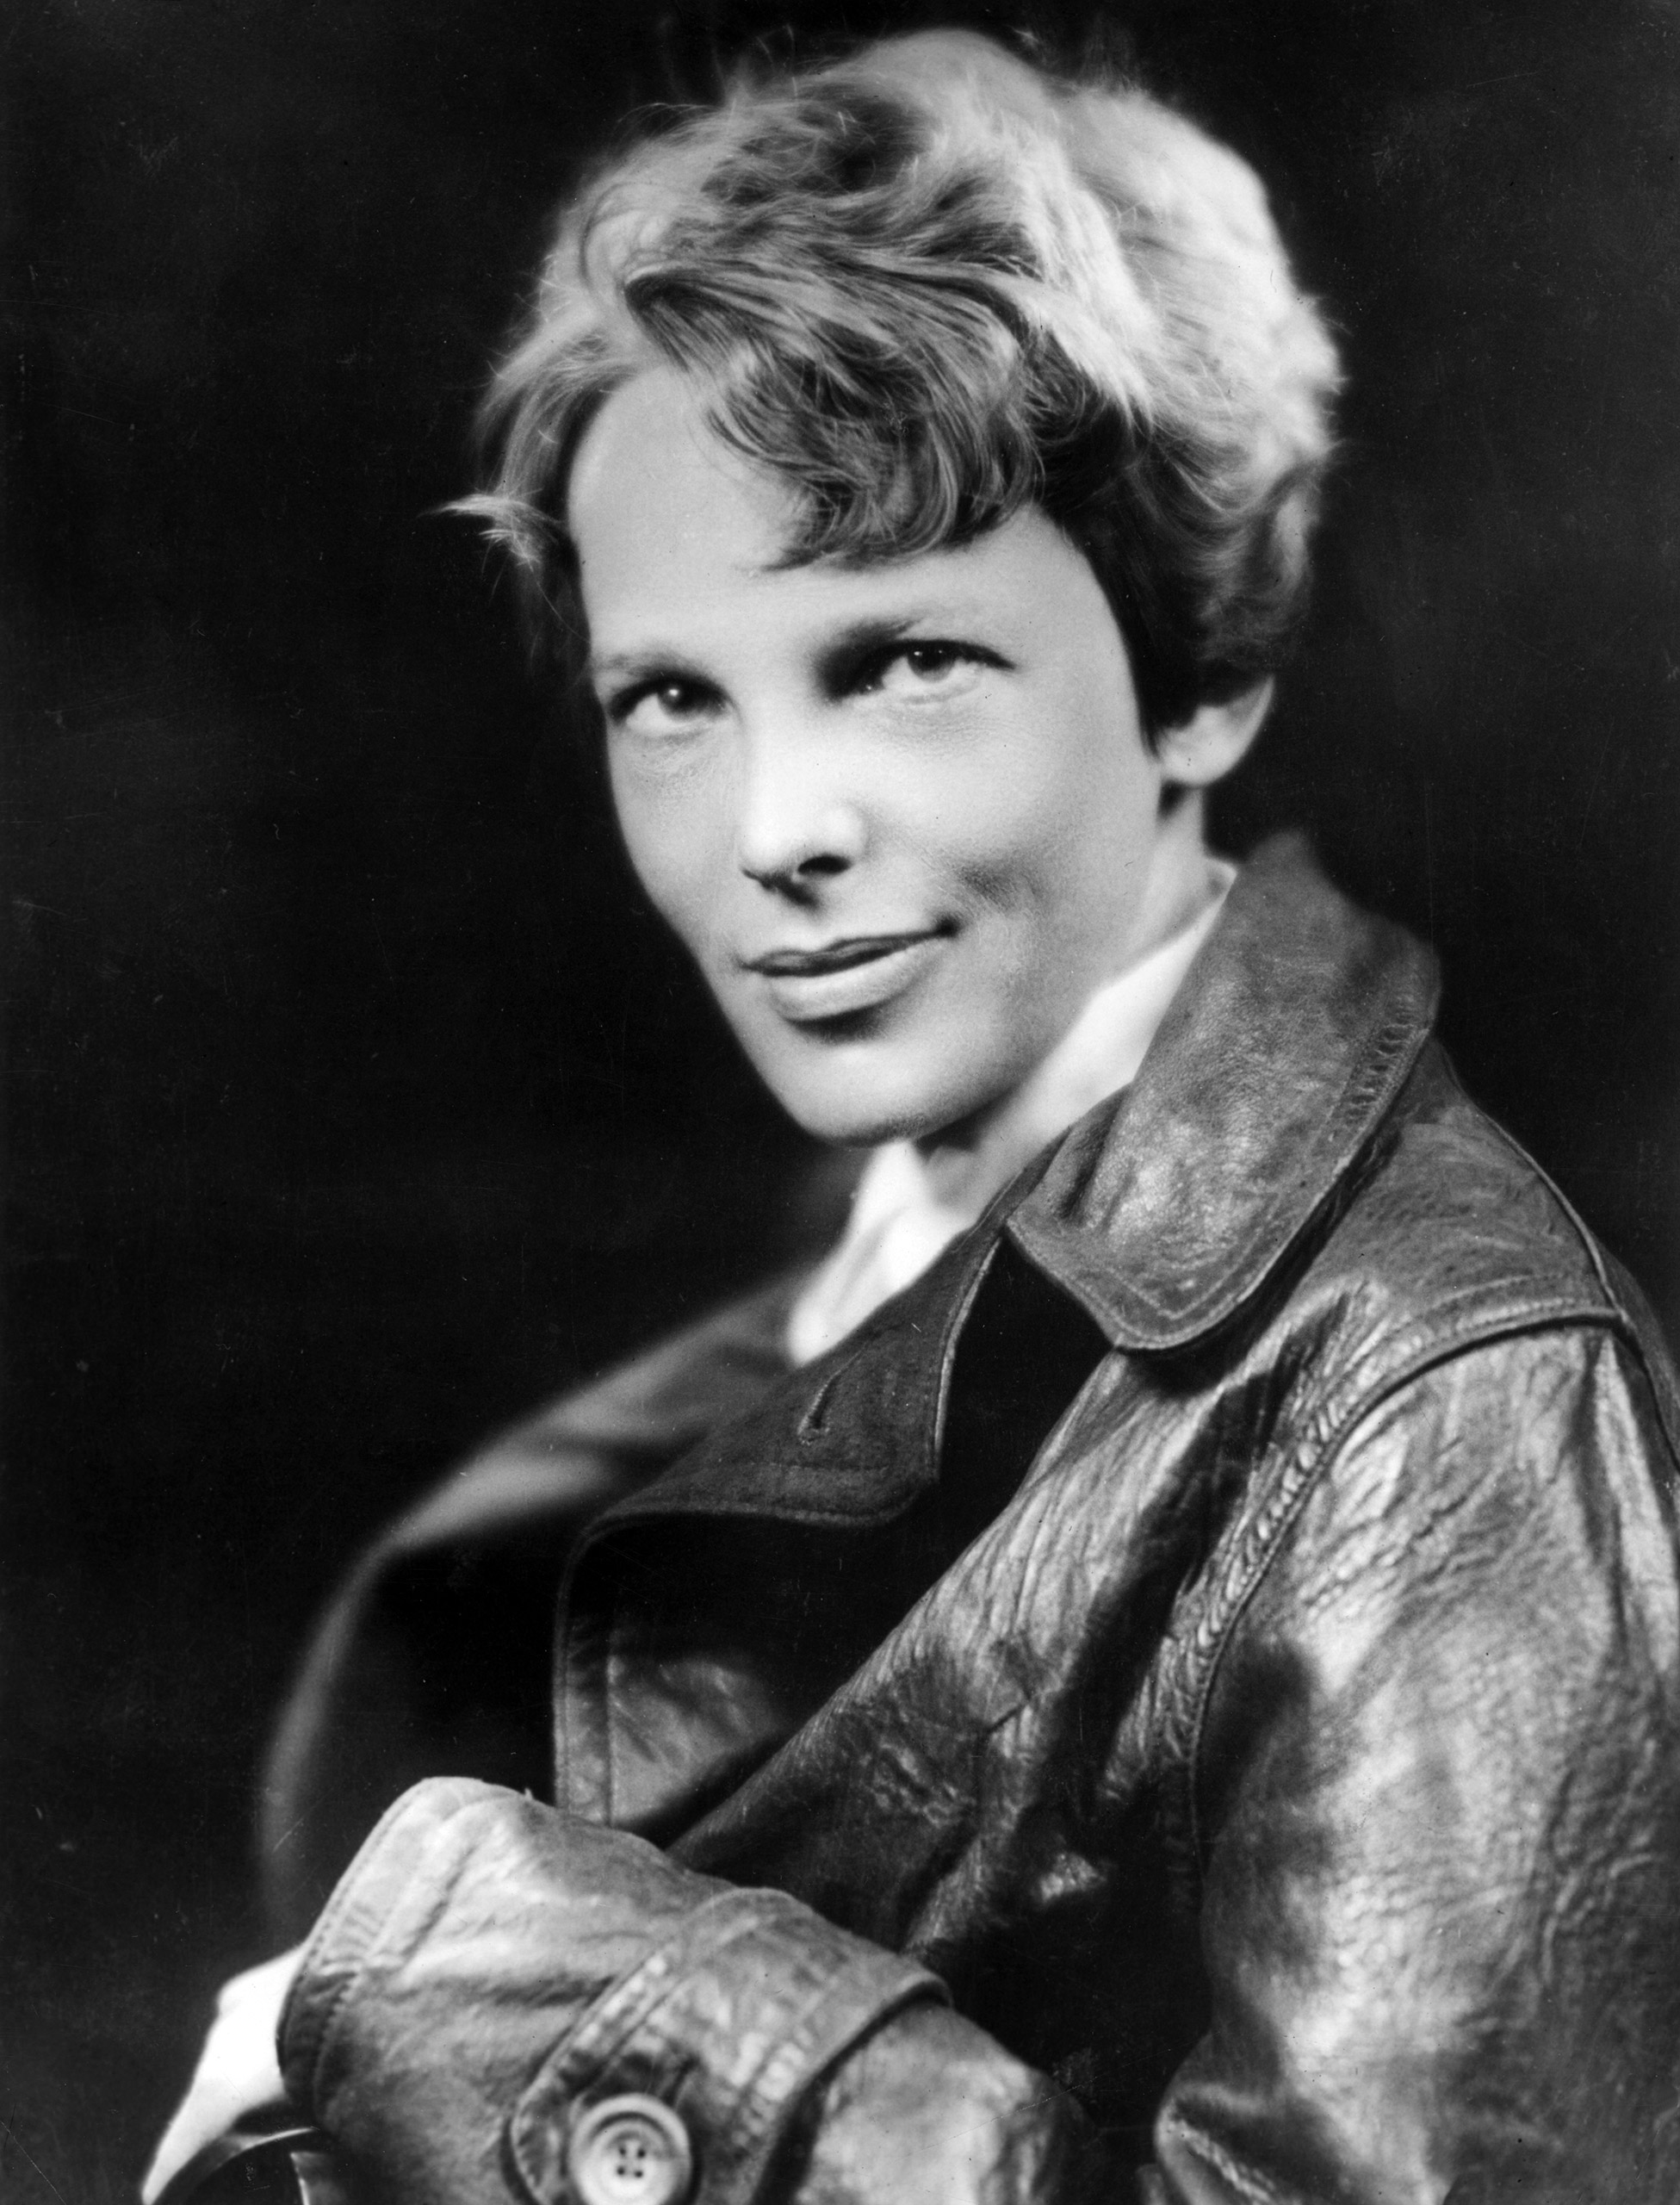 American aviator Amelia Earhart, the first woman to complete a solo transatlantic flight, wearing a leather jacket. Circa 1932. (Hulton Archive—Getty Images)